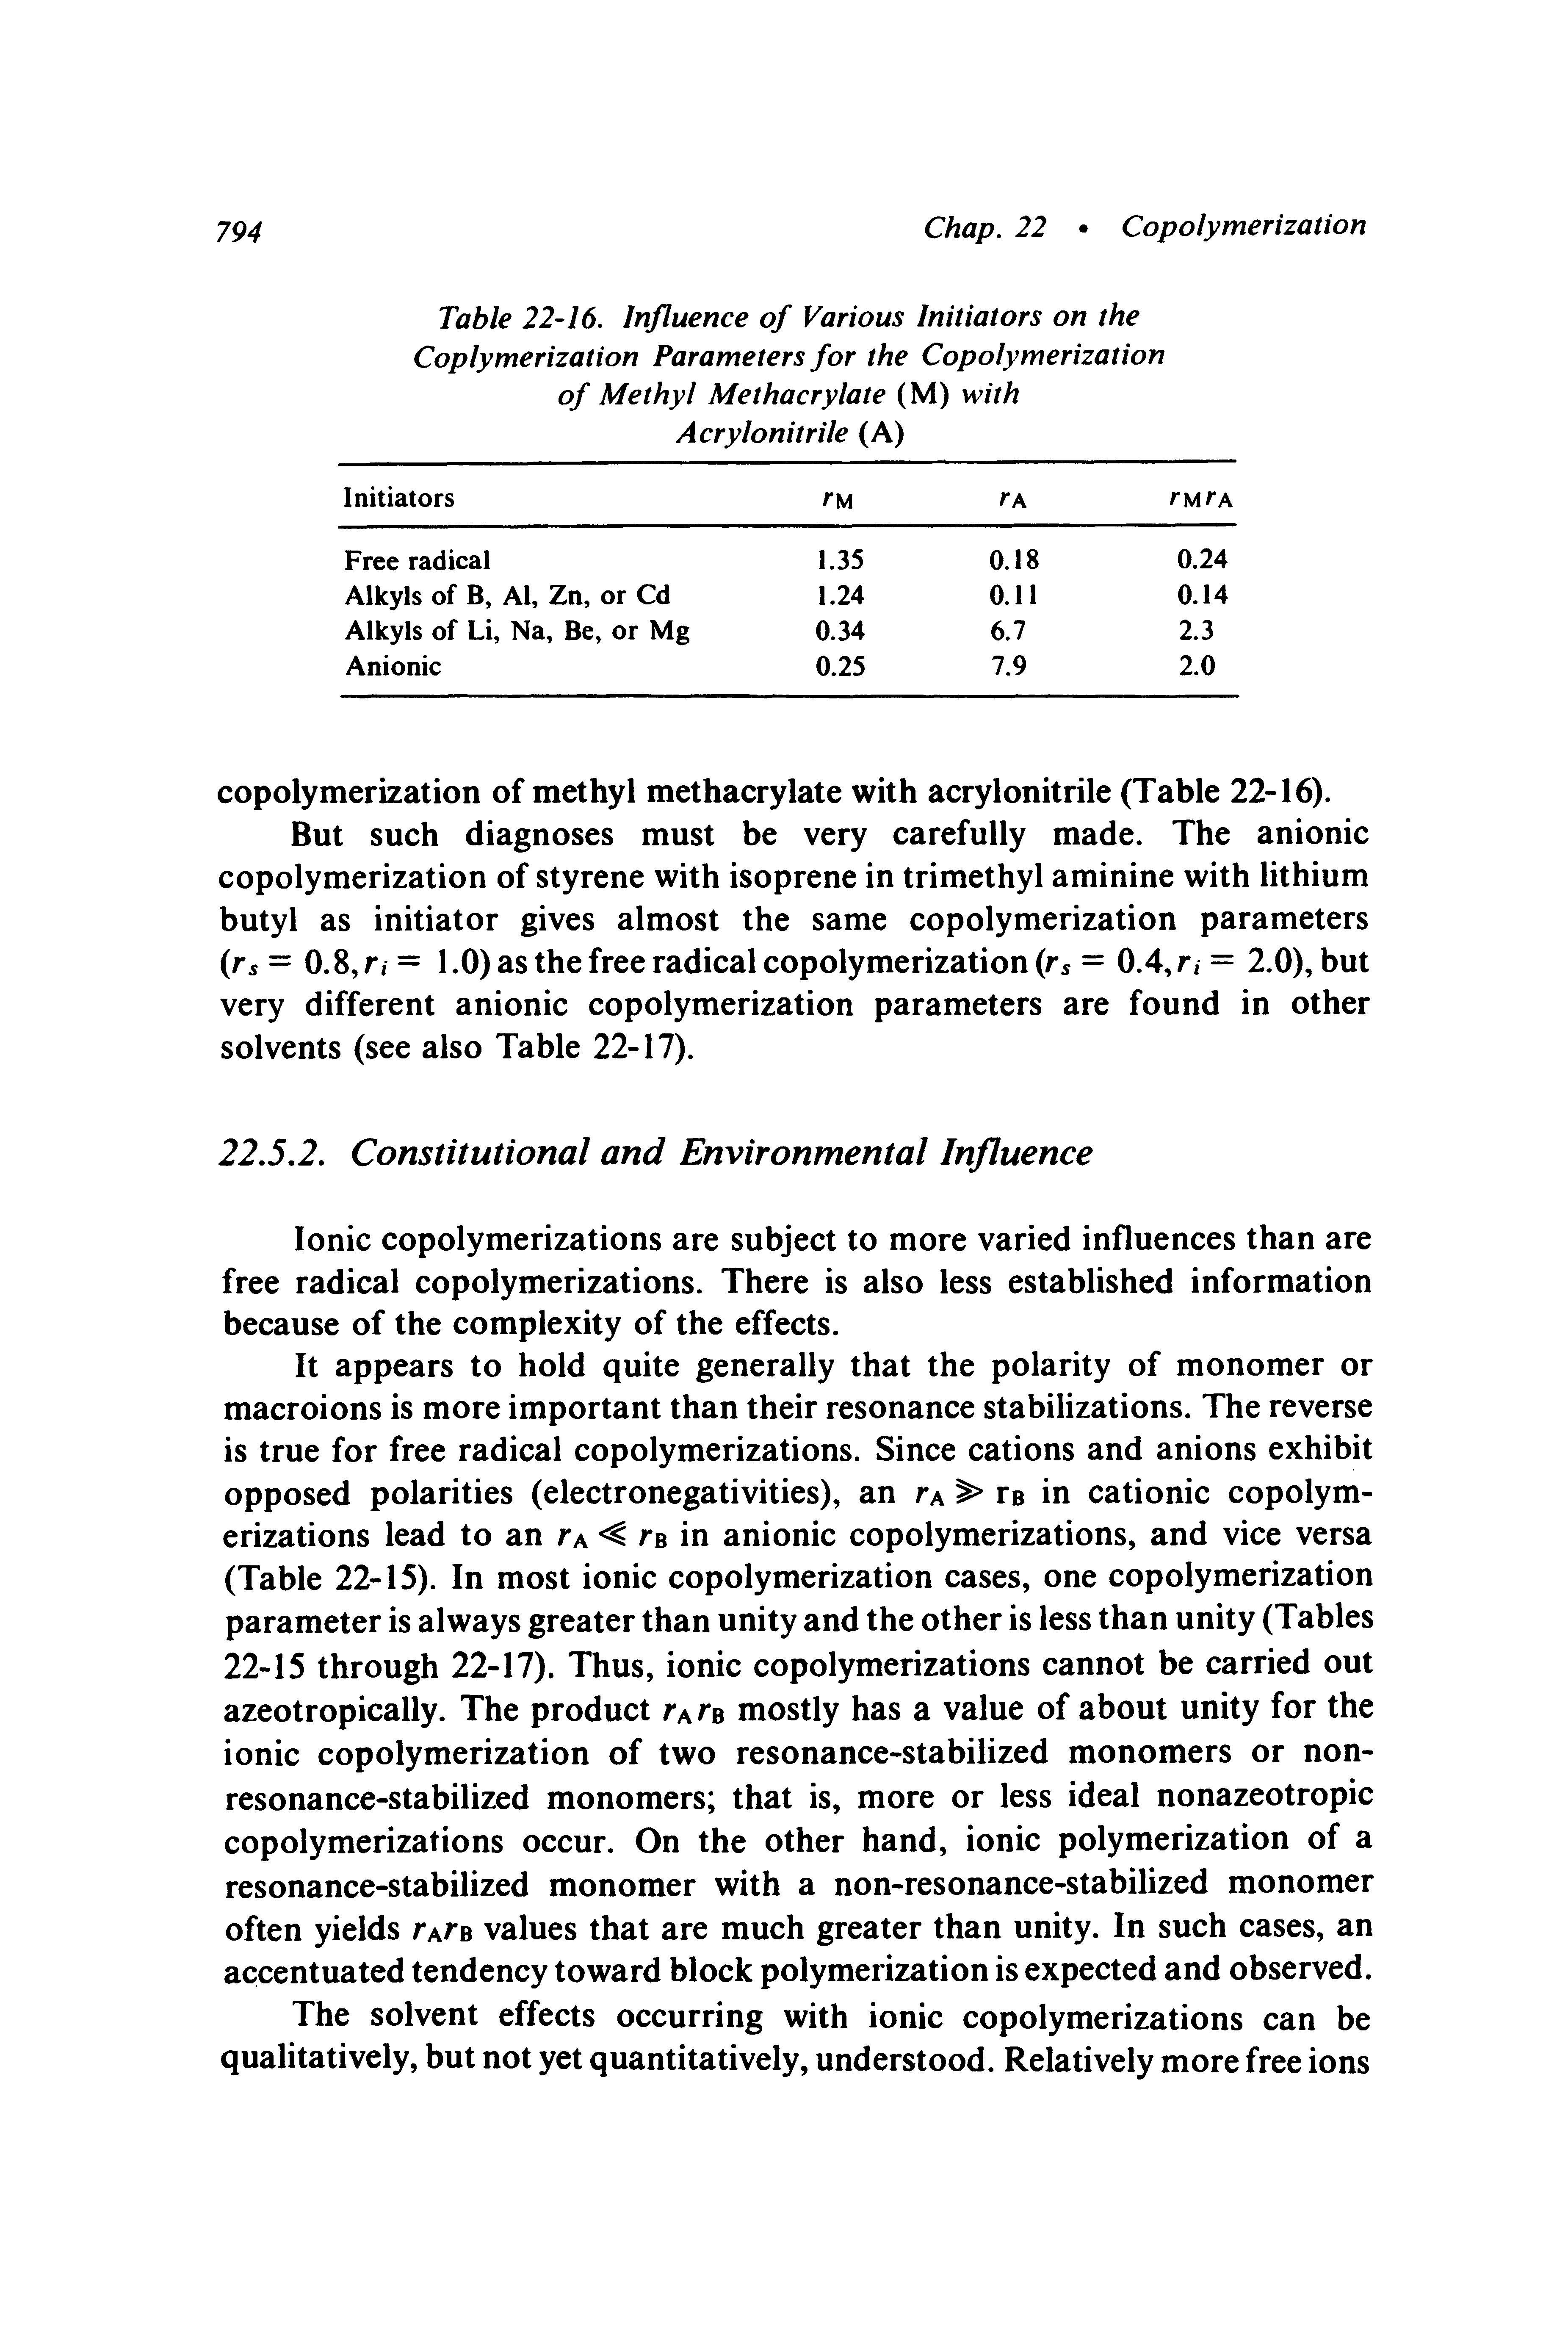 Table 22-16. Influence of Various Initiators on the Coplymerization Parameters for the Copolymerization of Methyl Methacrylate (M) with Acrylonitrile (A)...